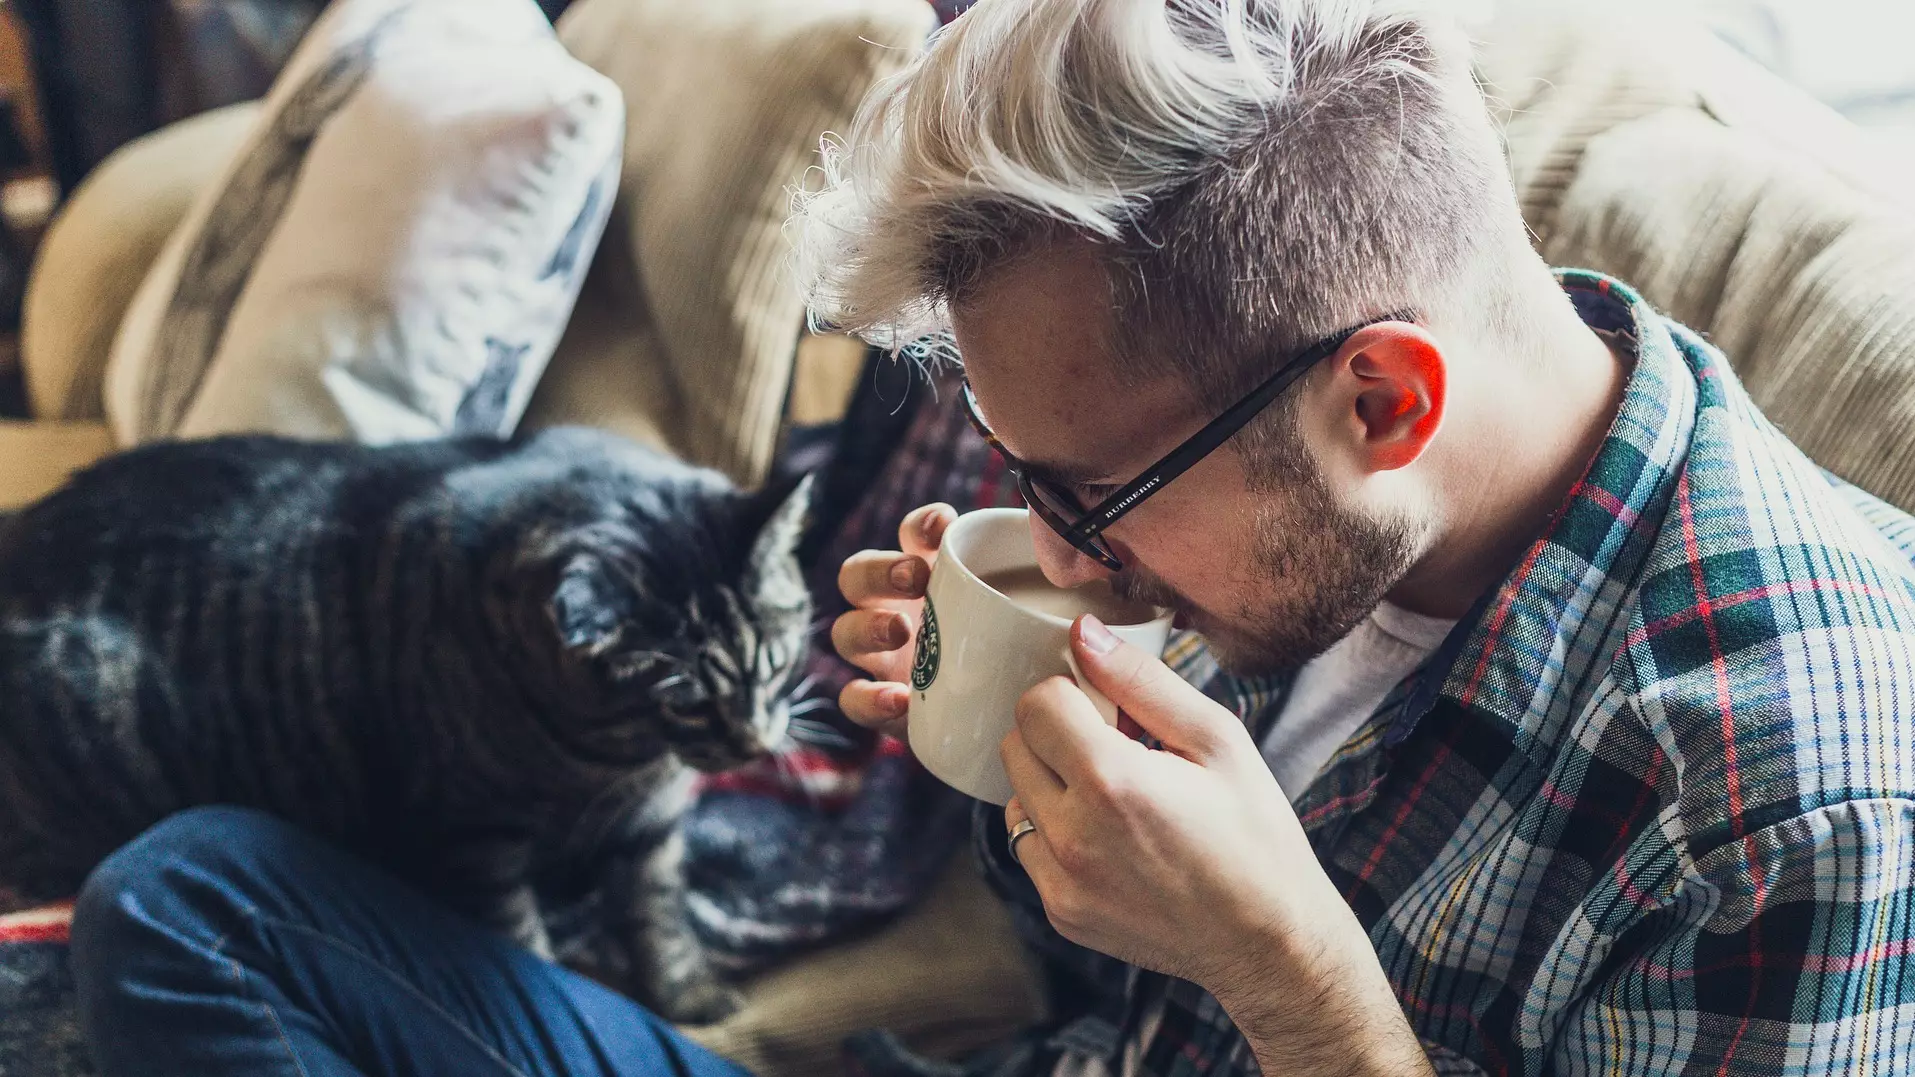 Women Are Less Likely To Swipe Right On Male Profiles With Cat Pictures